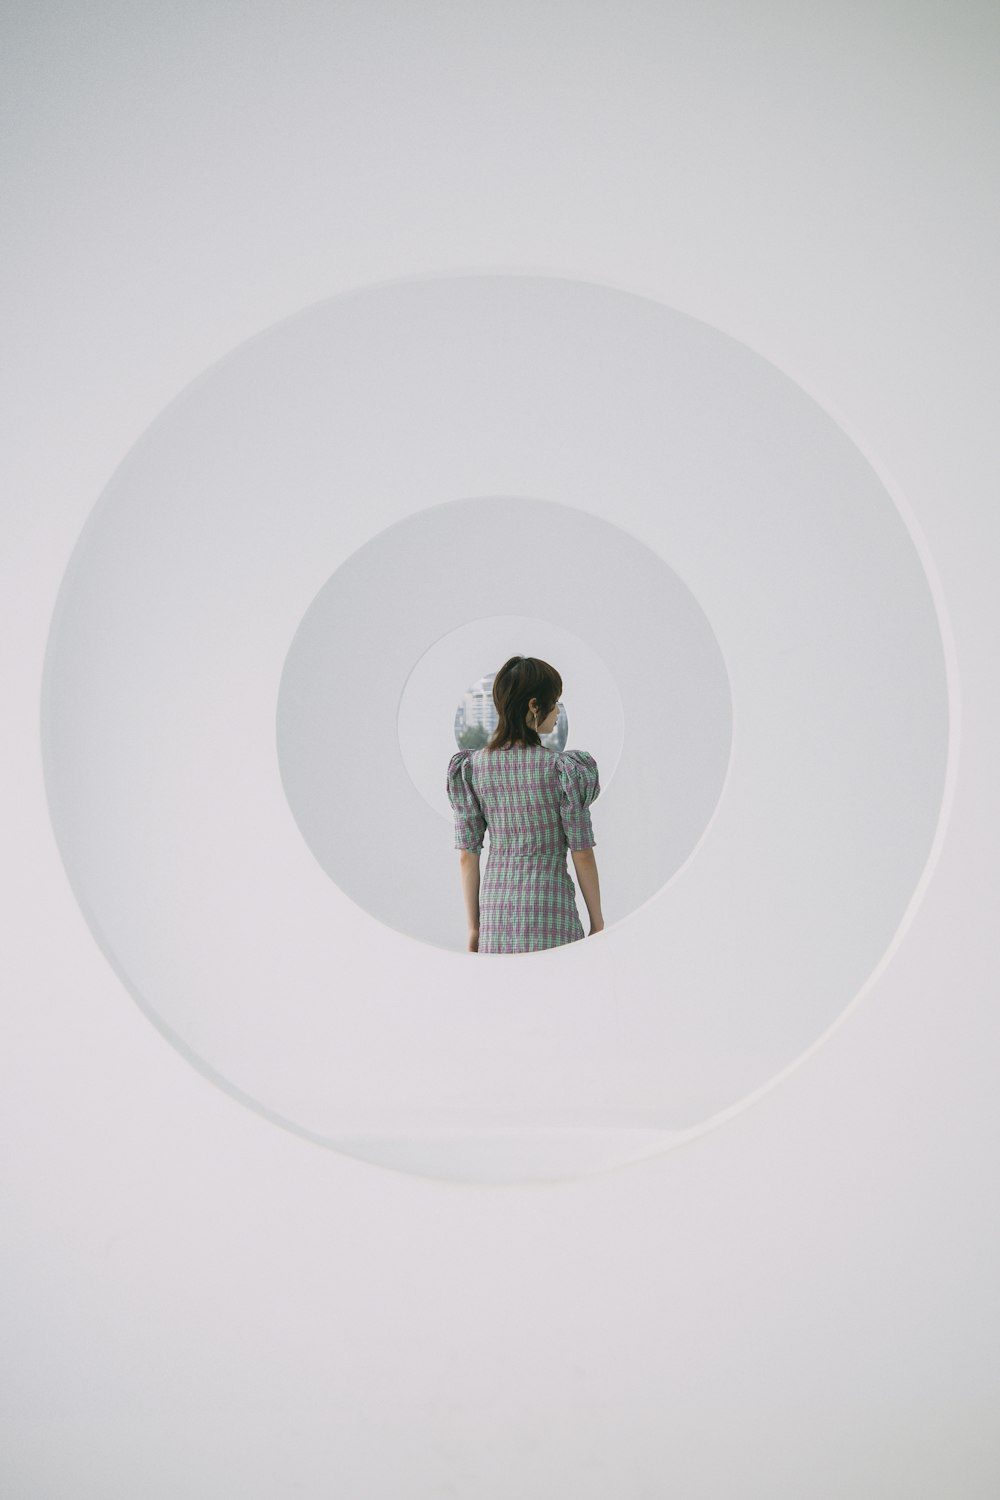 a woman standing in a white circle with her back to the camera